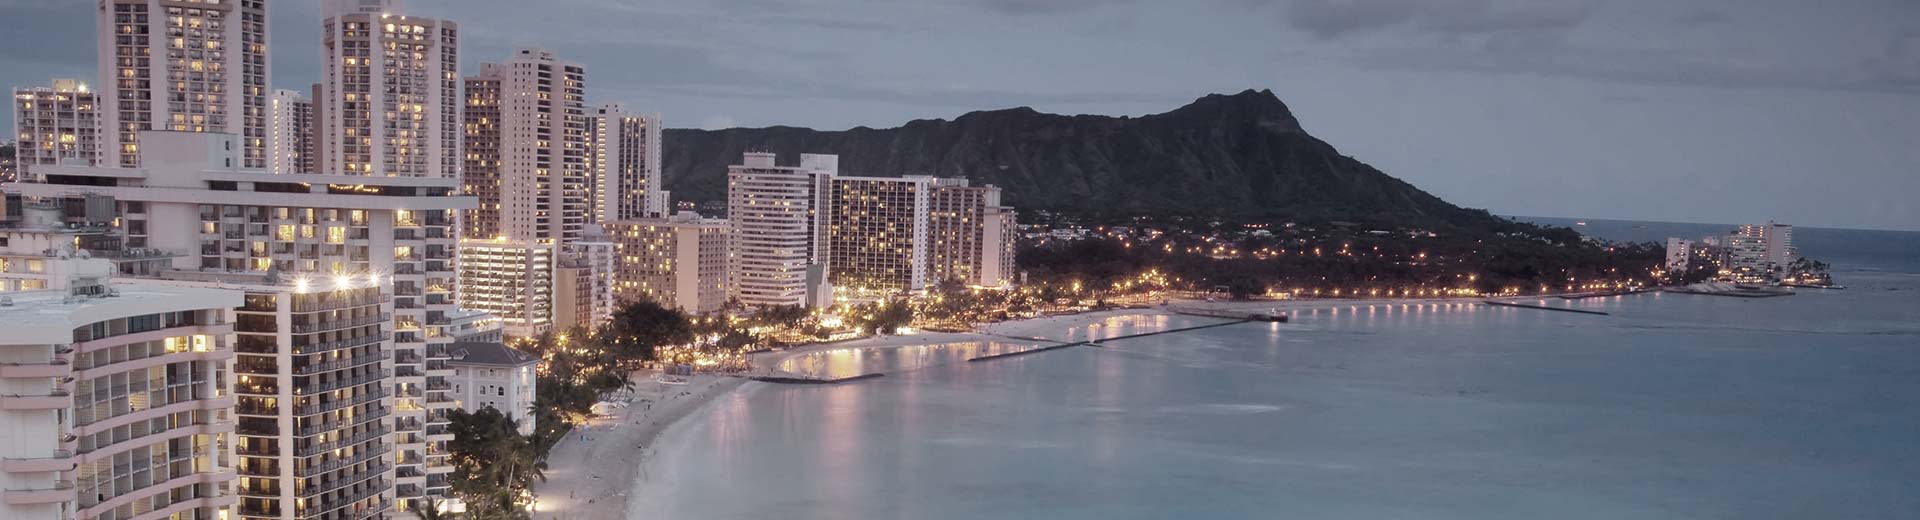 The beautiful coast of Honolulu with tall white hotels in the foreground.